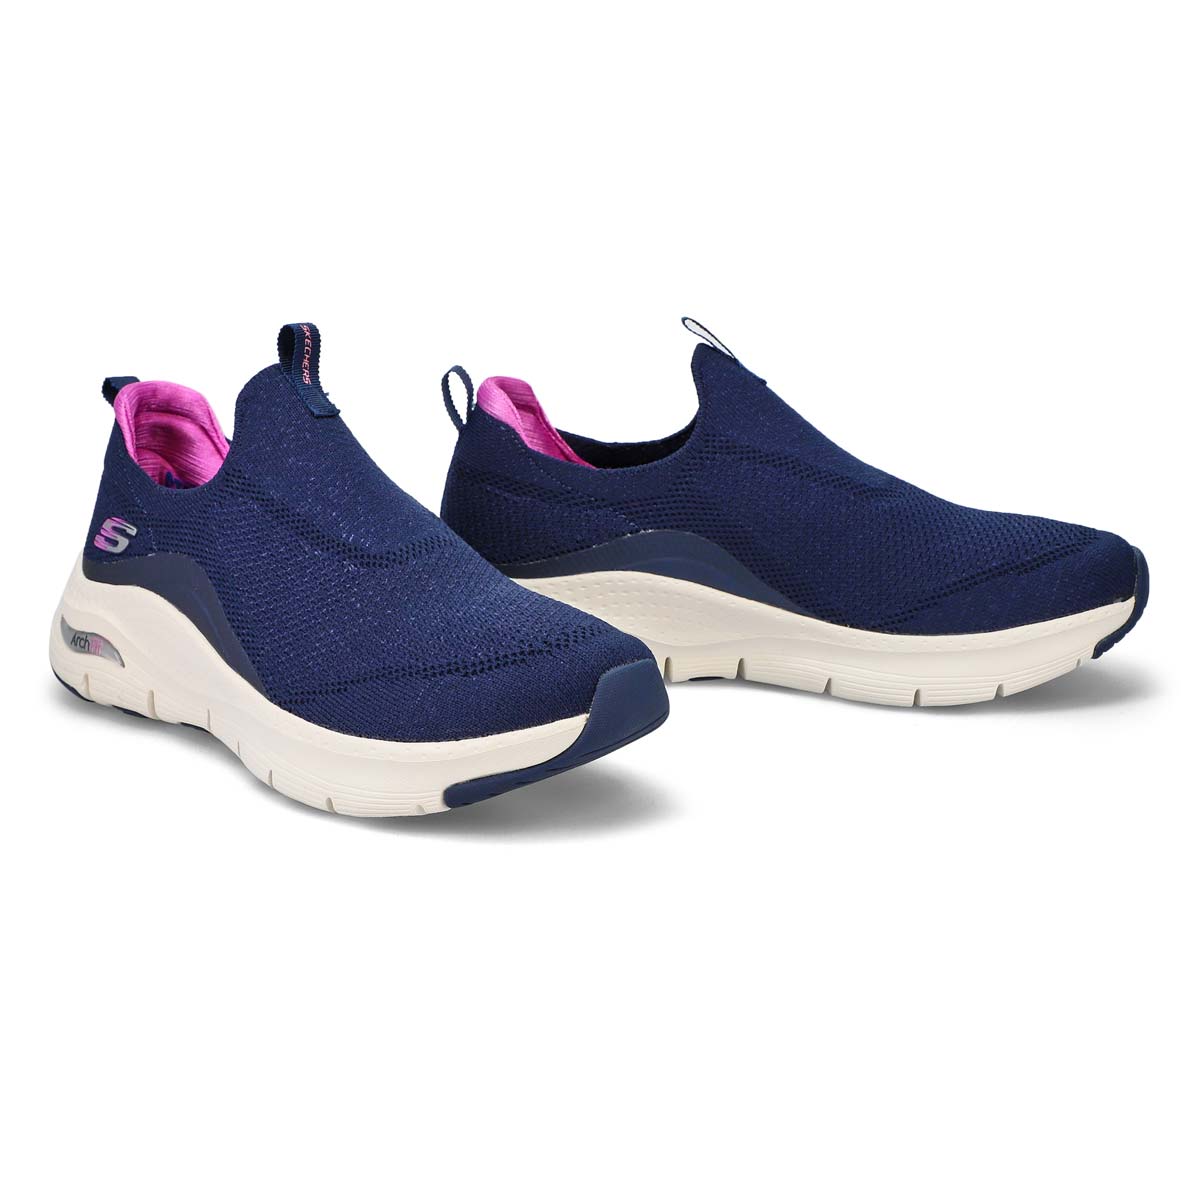 skechers arch support shoes for women